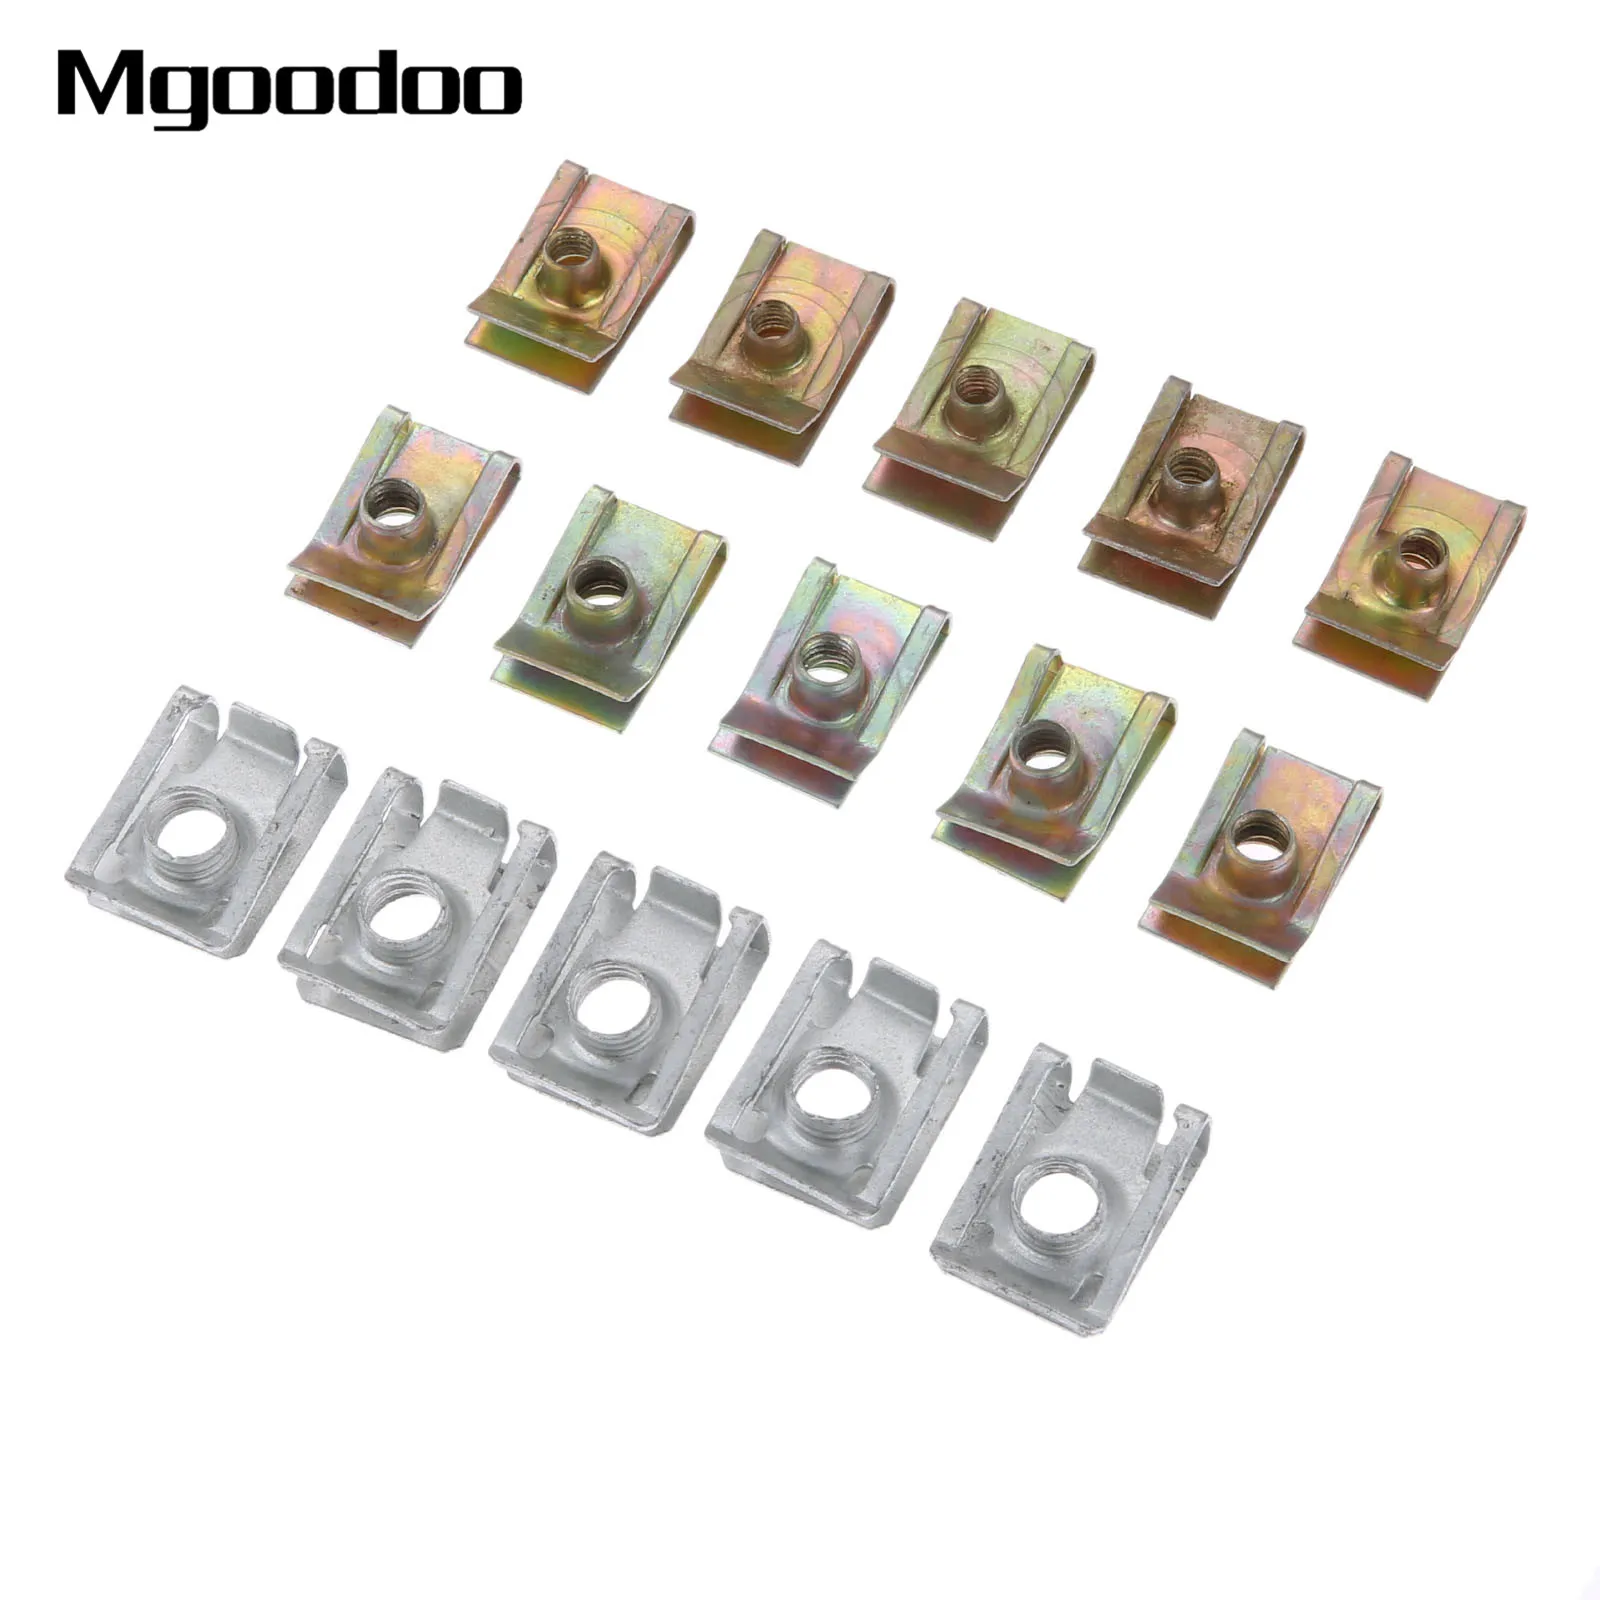 10Pcs Auto Clips M5 M6 M8 Clips Fastener Speed Metal Mounting Clamp For Car Motor Tread Panel Spire Nut Fairing Clip